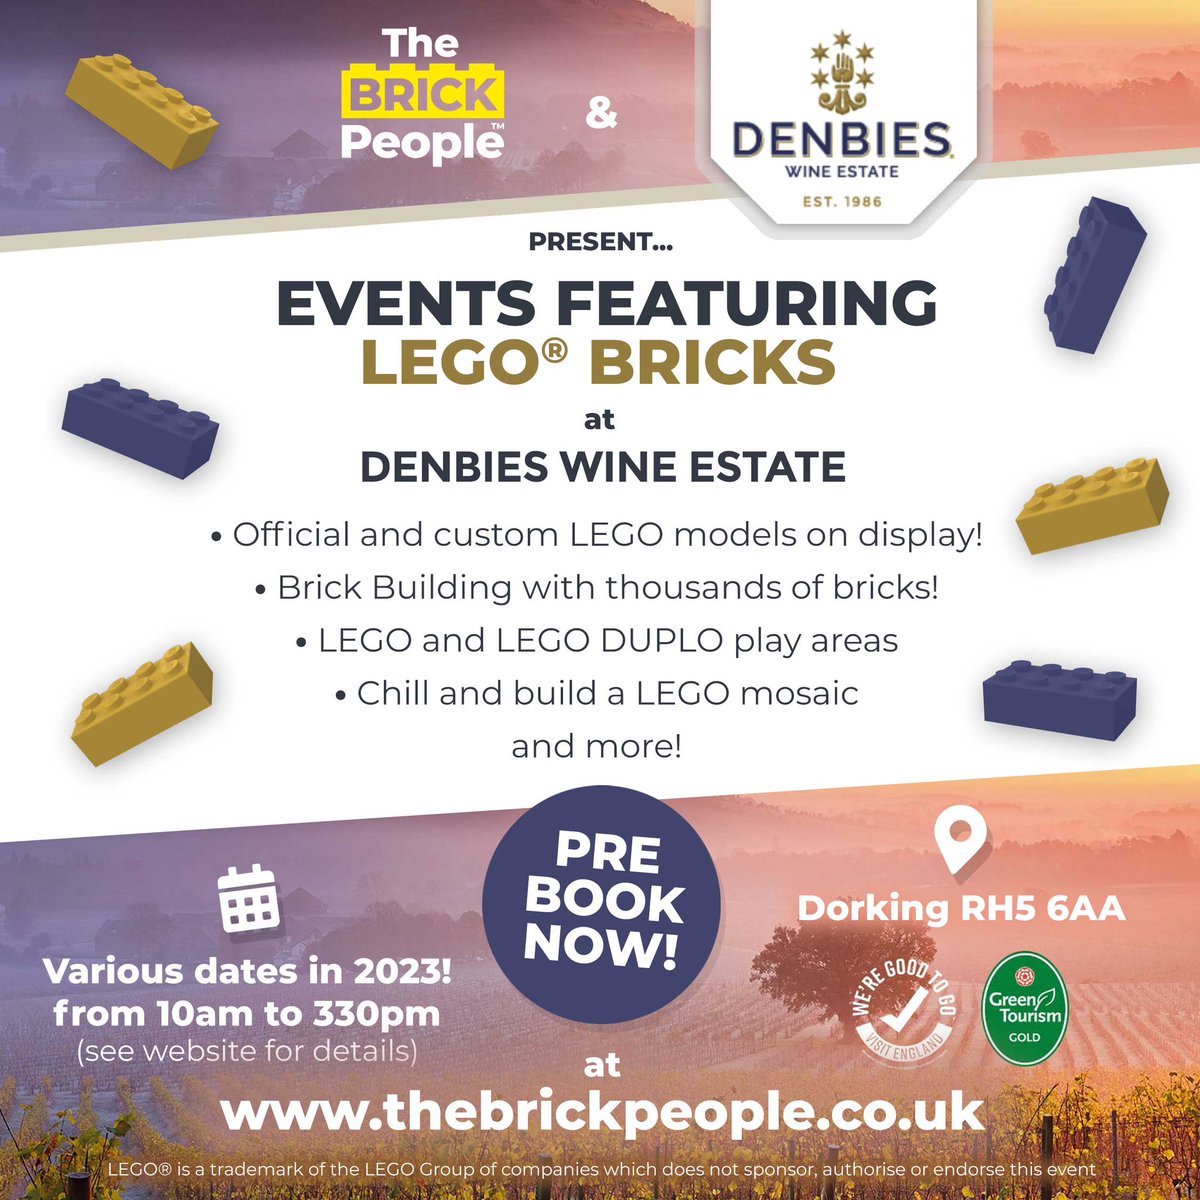 We have lots of events coming up @denbiesvineyard in Dorking, check out our website for all dates. Next up is this Sunday 17th and Monday 18th! #lego #legoevents #dorking #dorkingevents